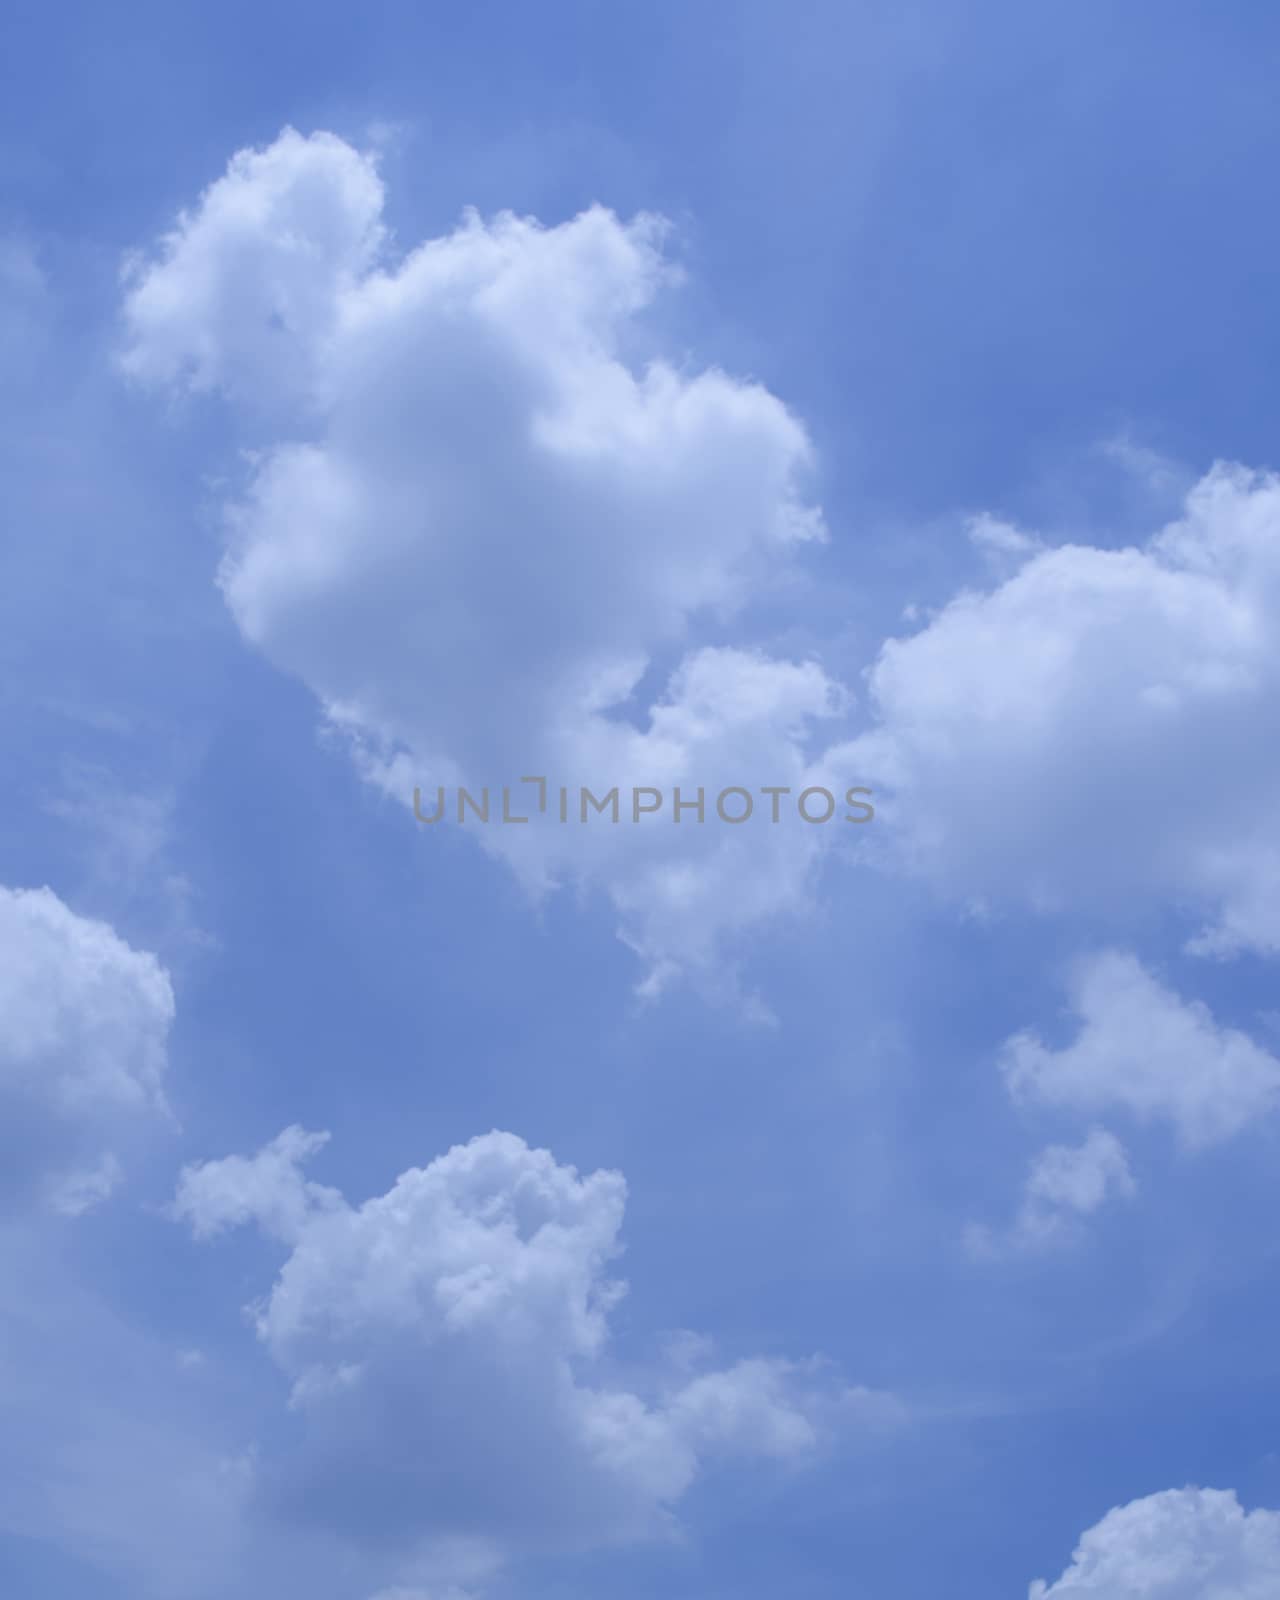 The Cloud in Blue Sky at Noon